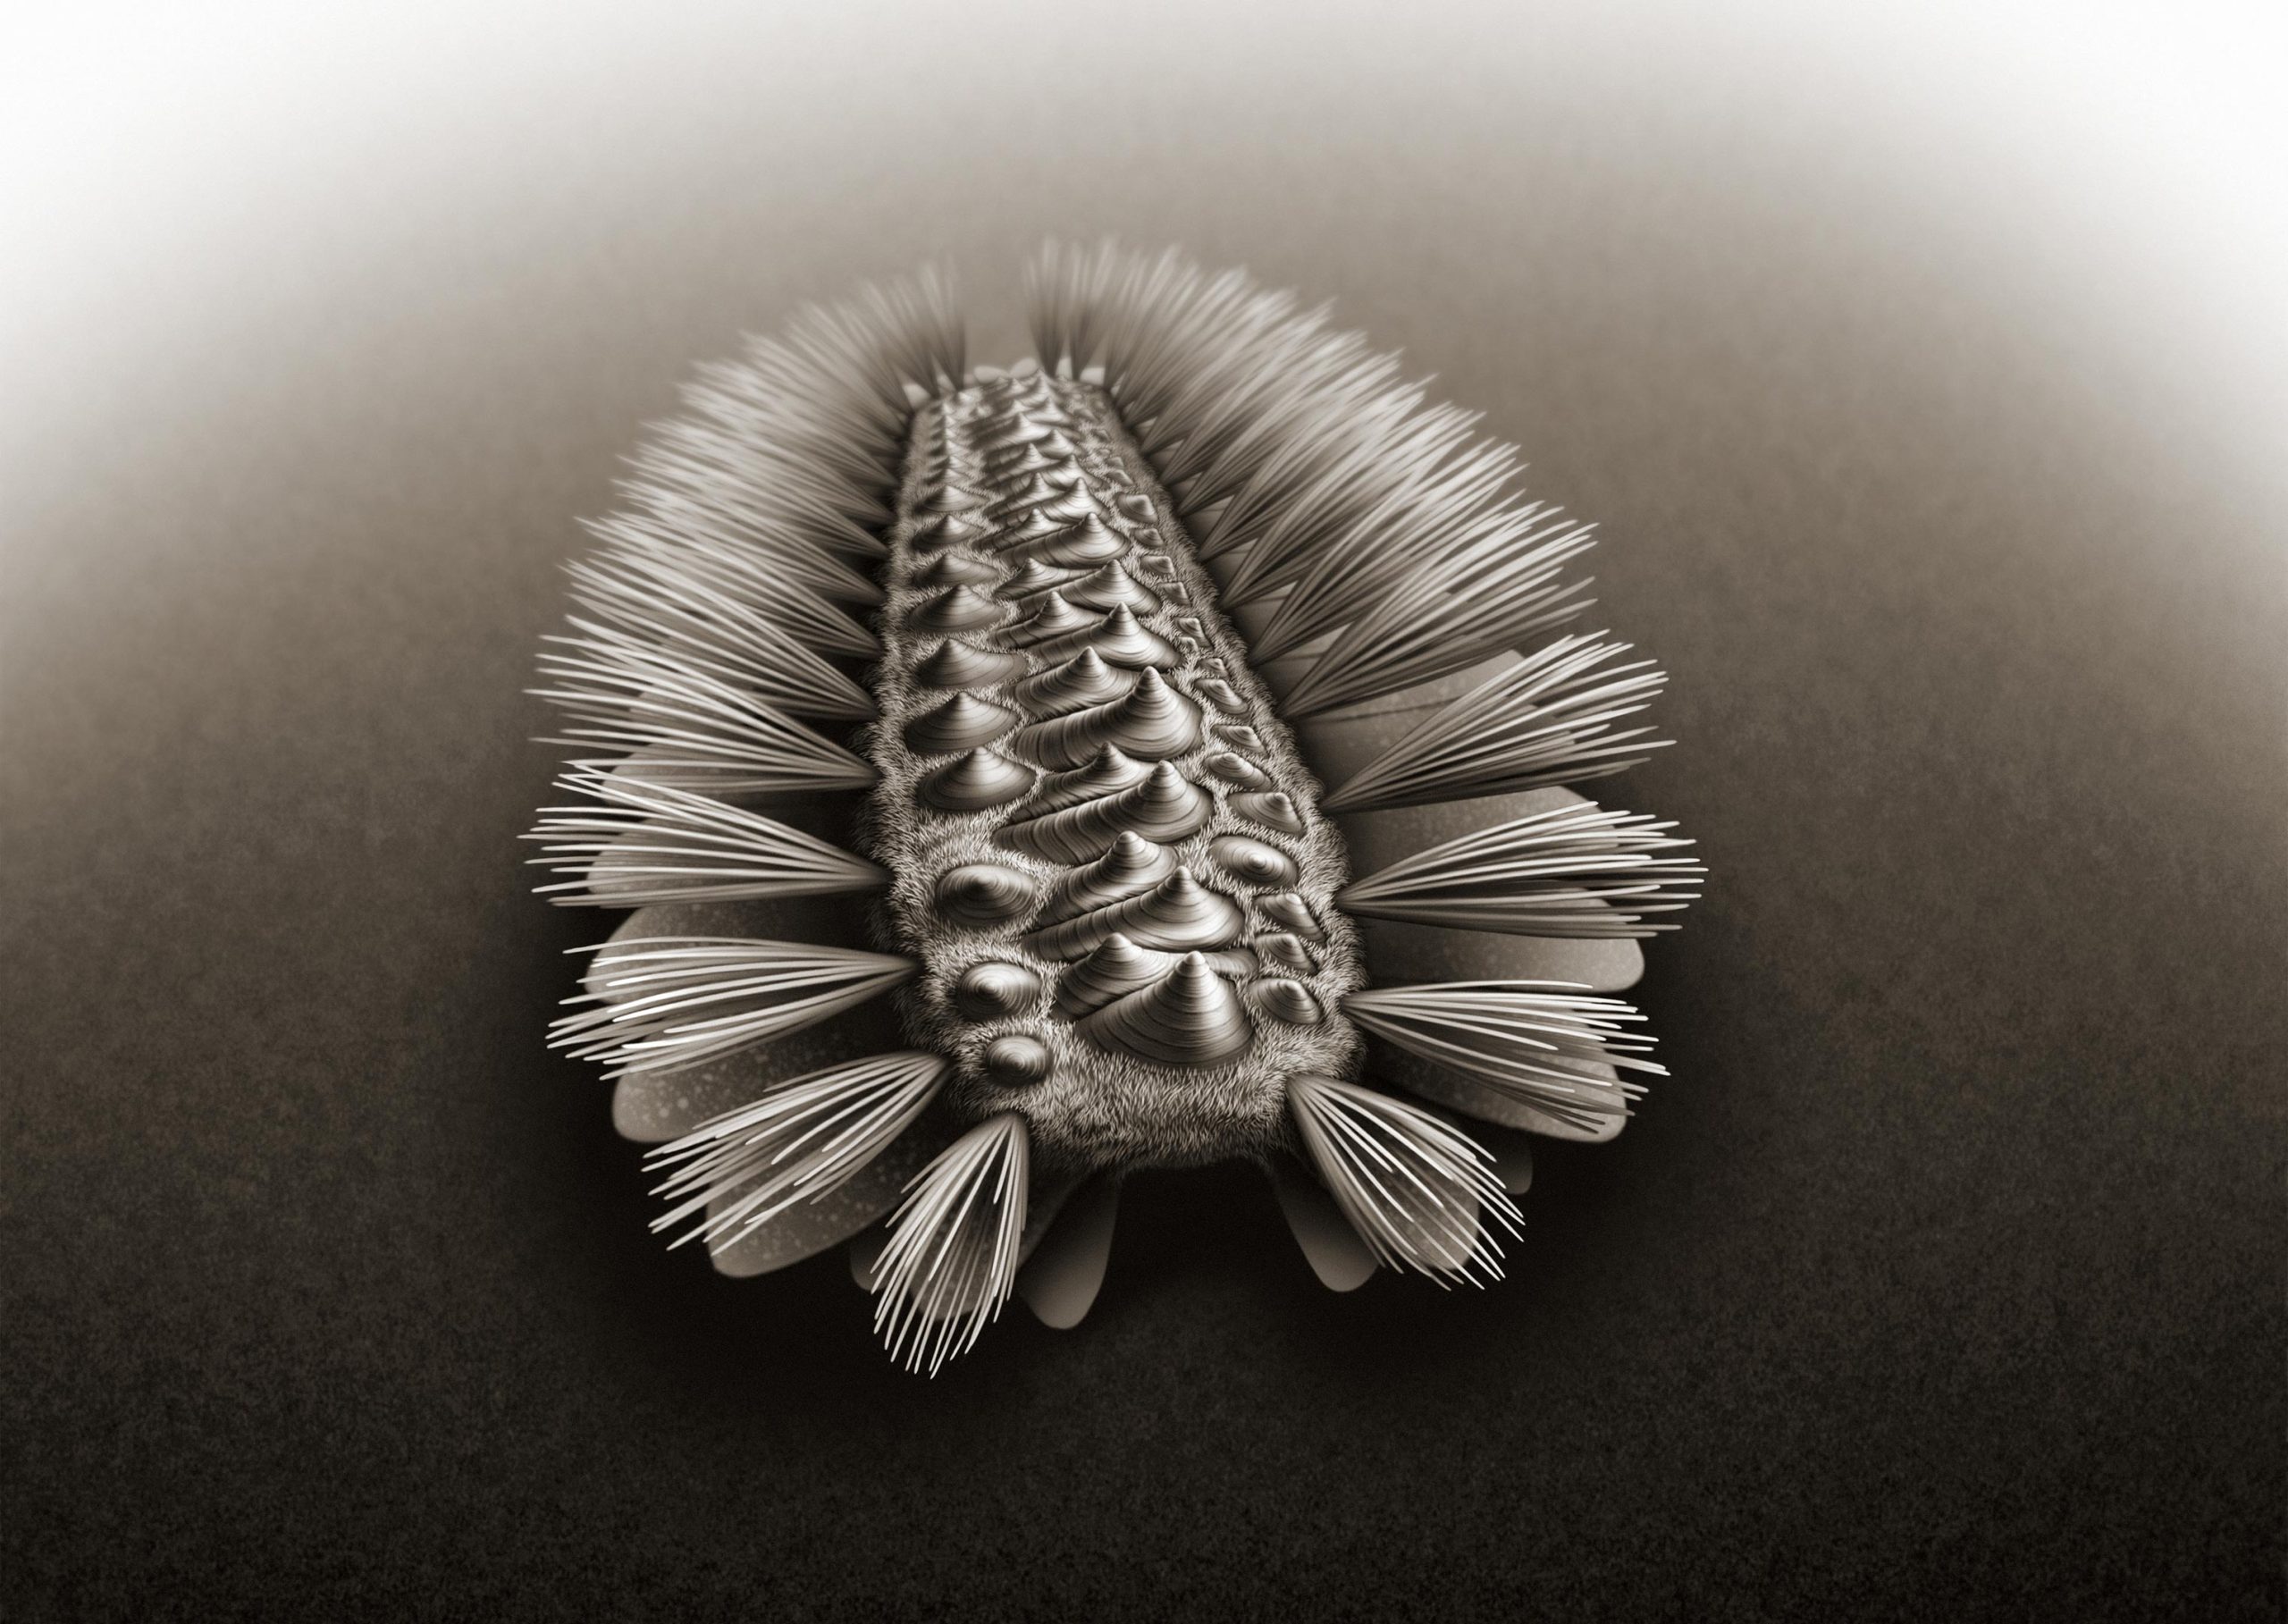 Ancestry of Three Major Animal Groups Revealed by 518-Million-Year-Old Armored Worm